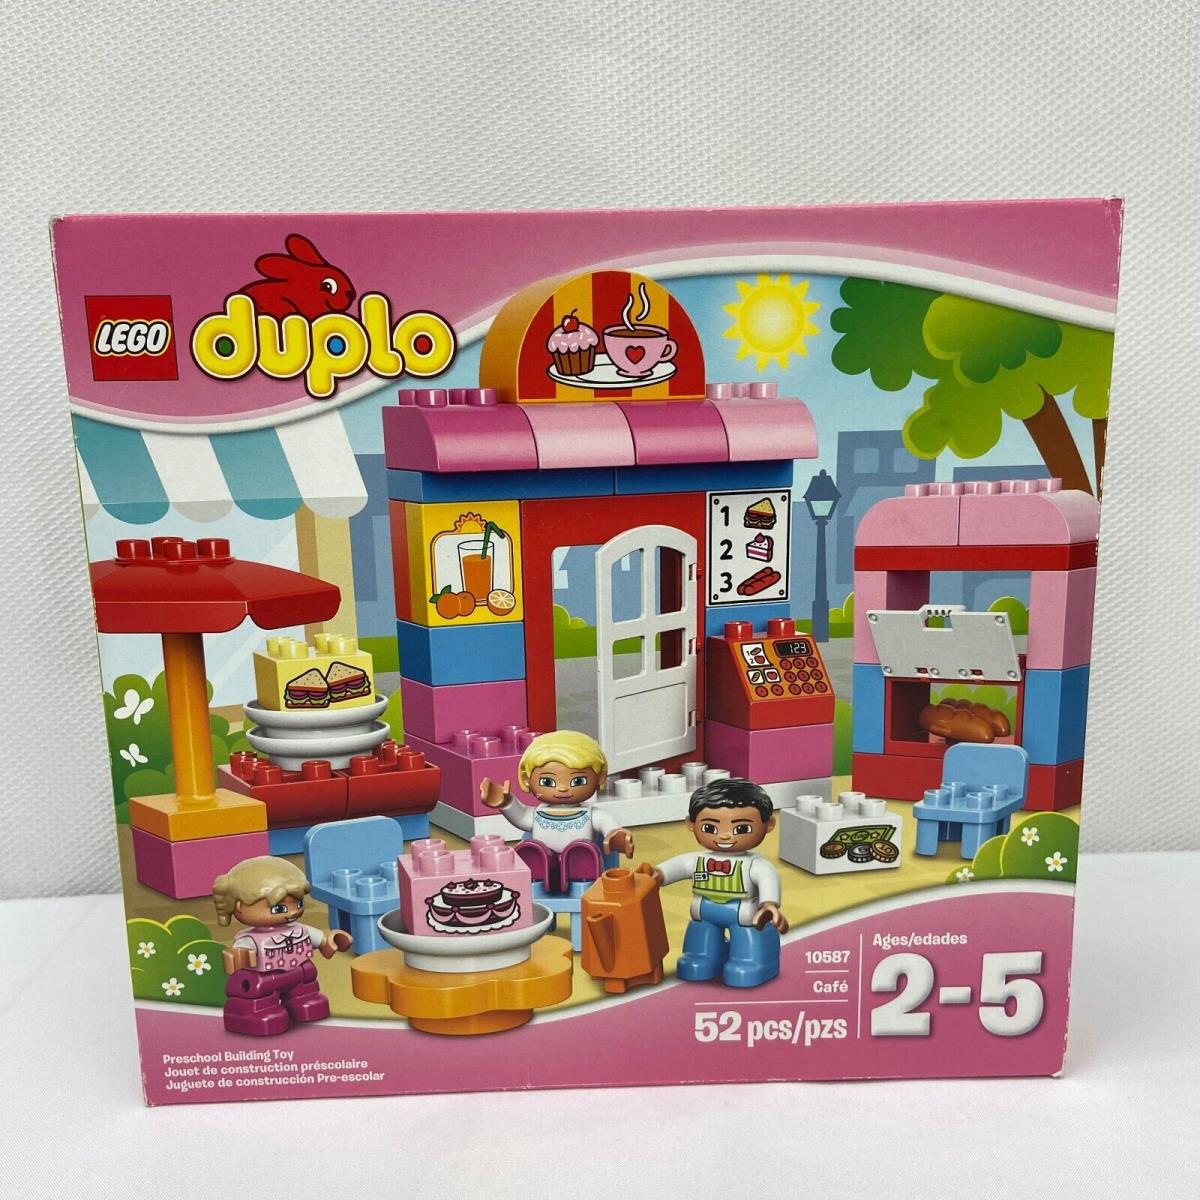 Retired Lego Duplo 10587 LE Caf 52-Piece Toy Set Complete